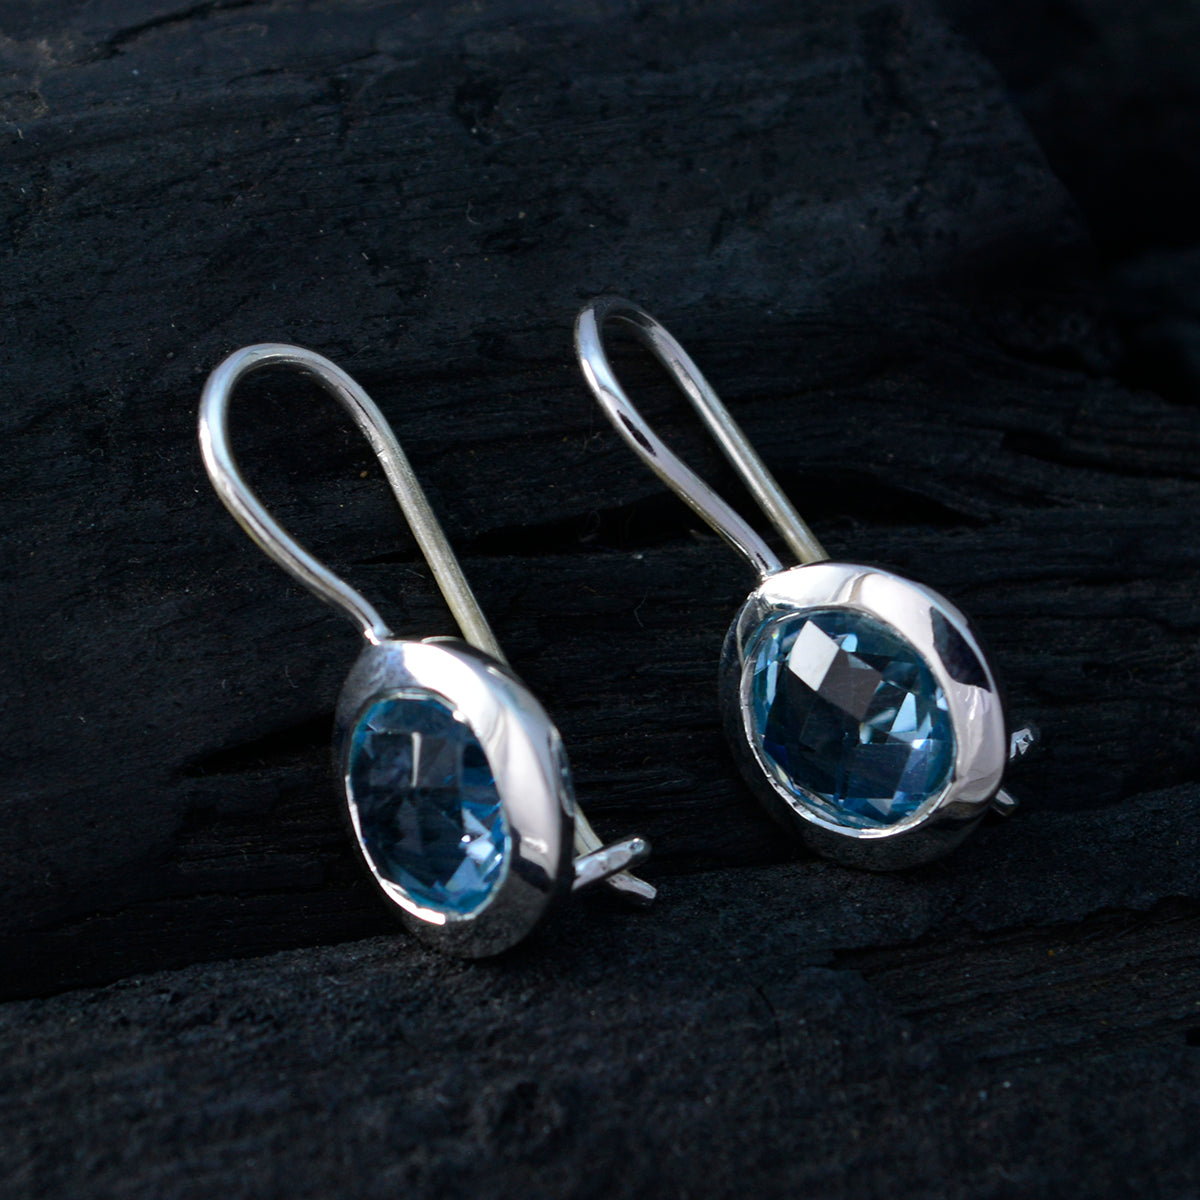 Riyo Real Gemstones round Faceted Blue Topaz Silver Earring gift for grandmother